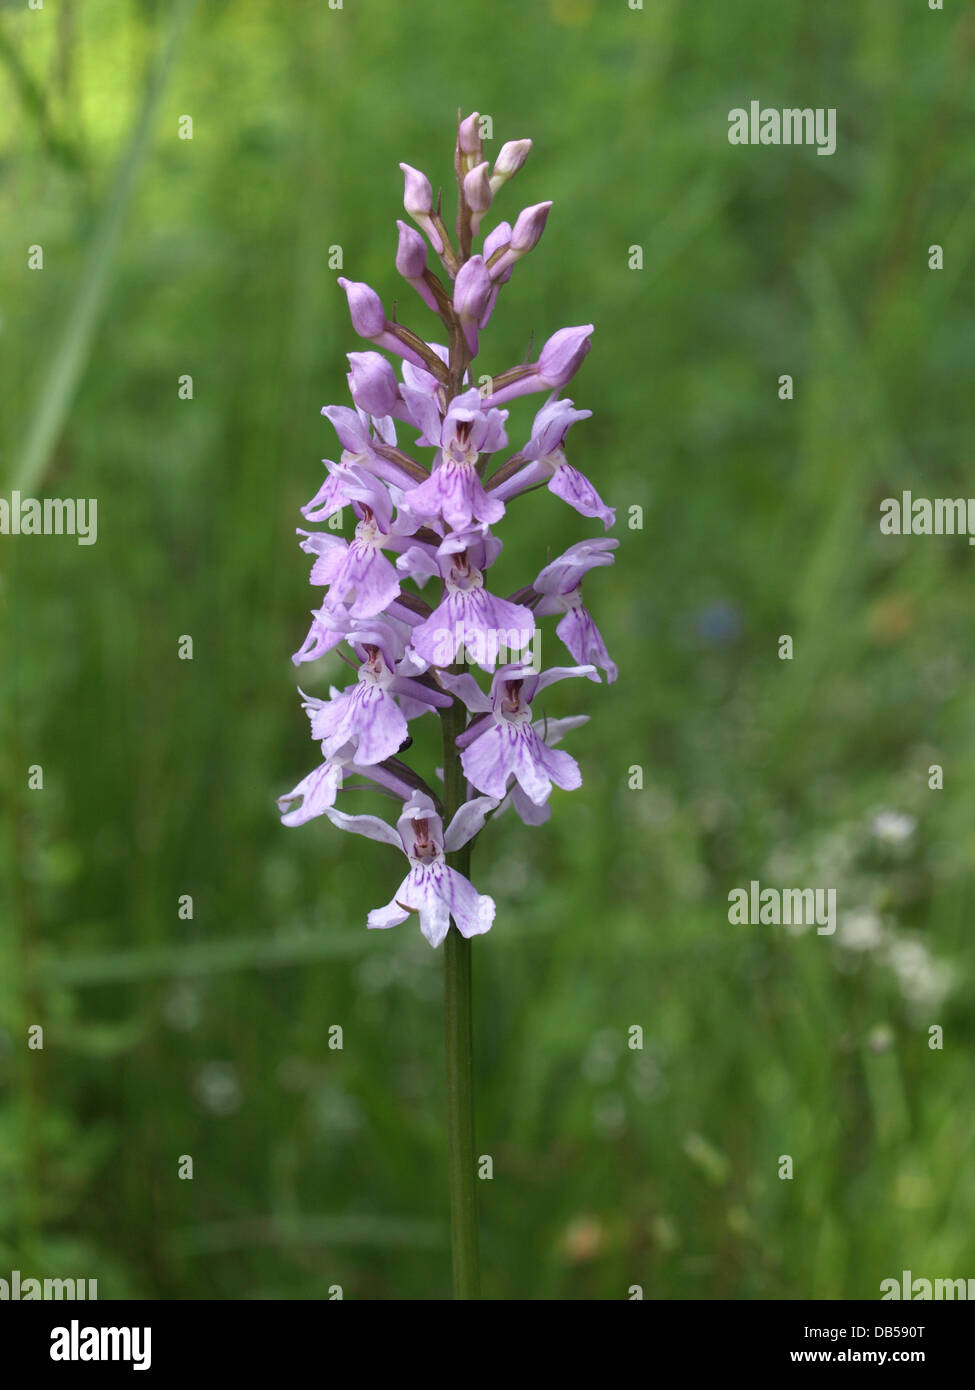 Heath spotted orchid, moorland spotted orchid / Dactylorhiza maculata / Geflecktes Knabenkraut Stock Photo